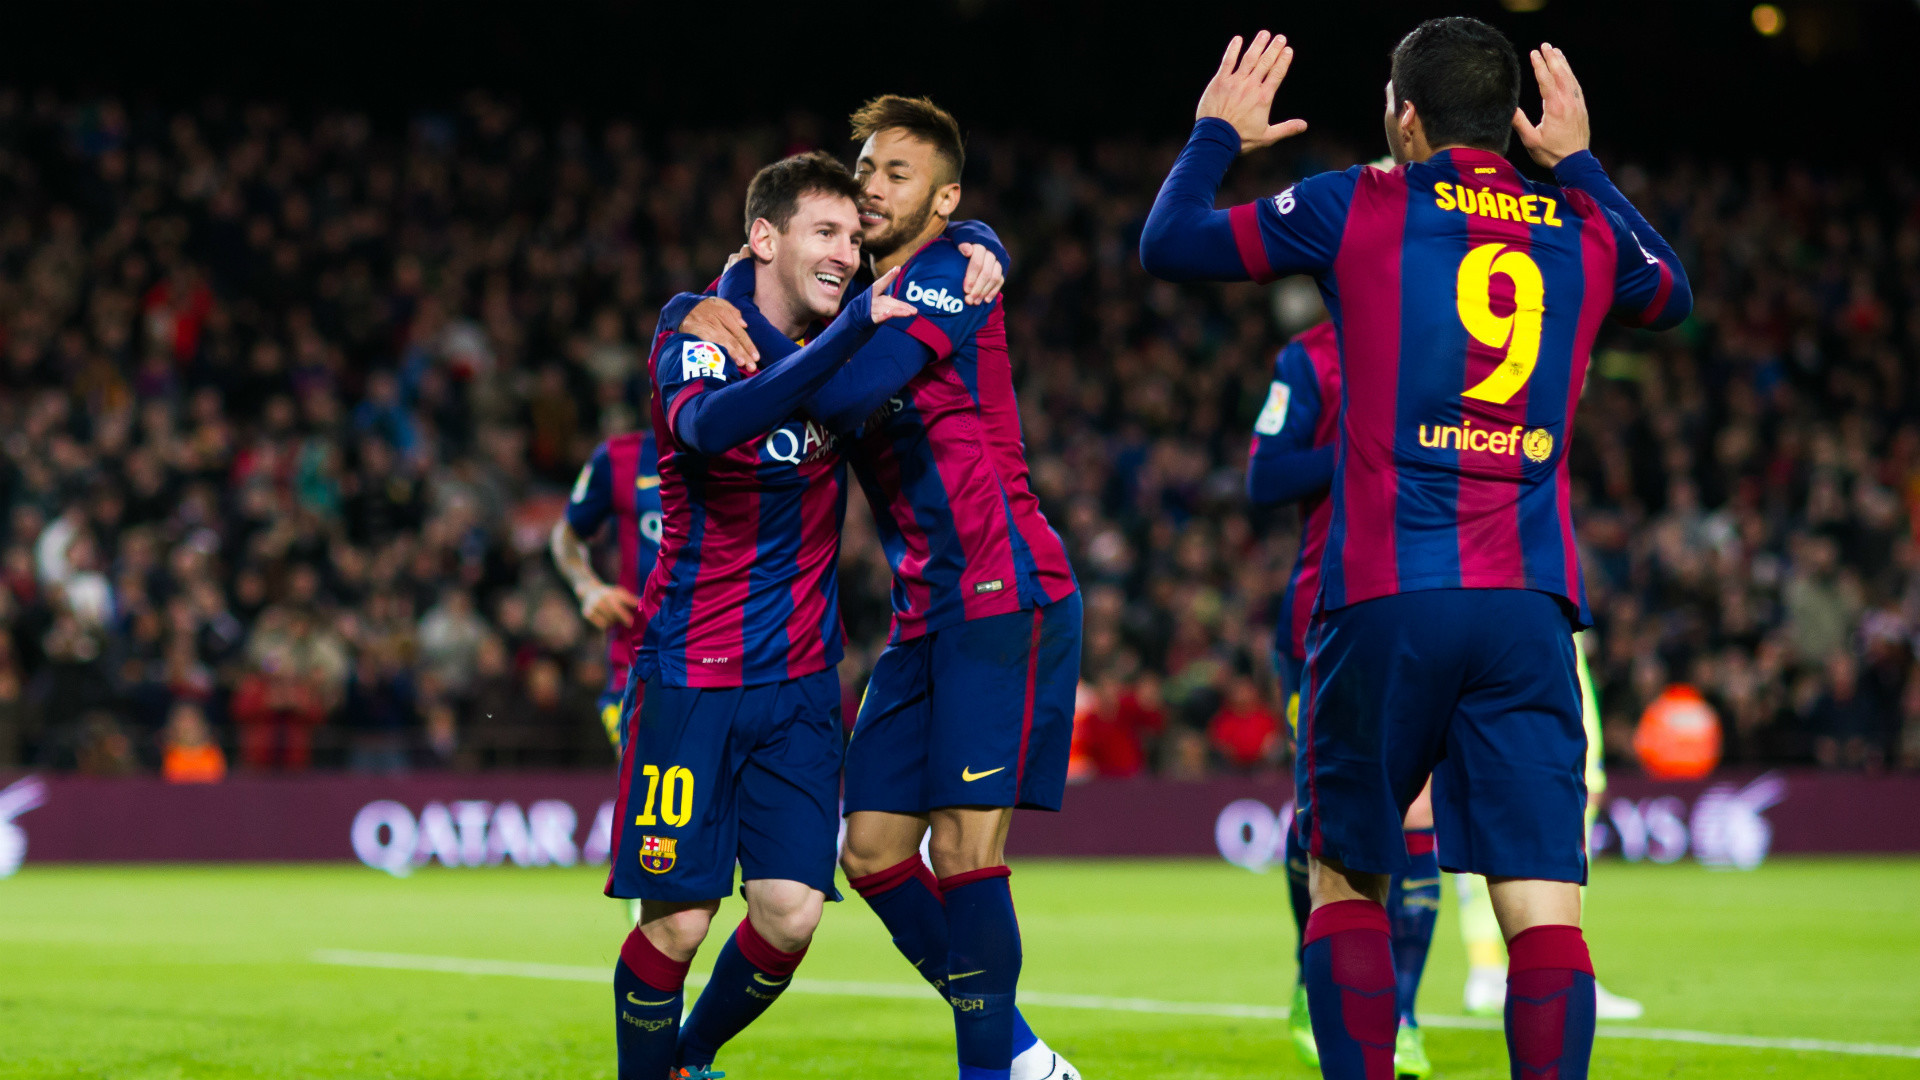 Luis Suarez and Neymar have helped Messi reach his best, says Diego Simeone